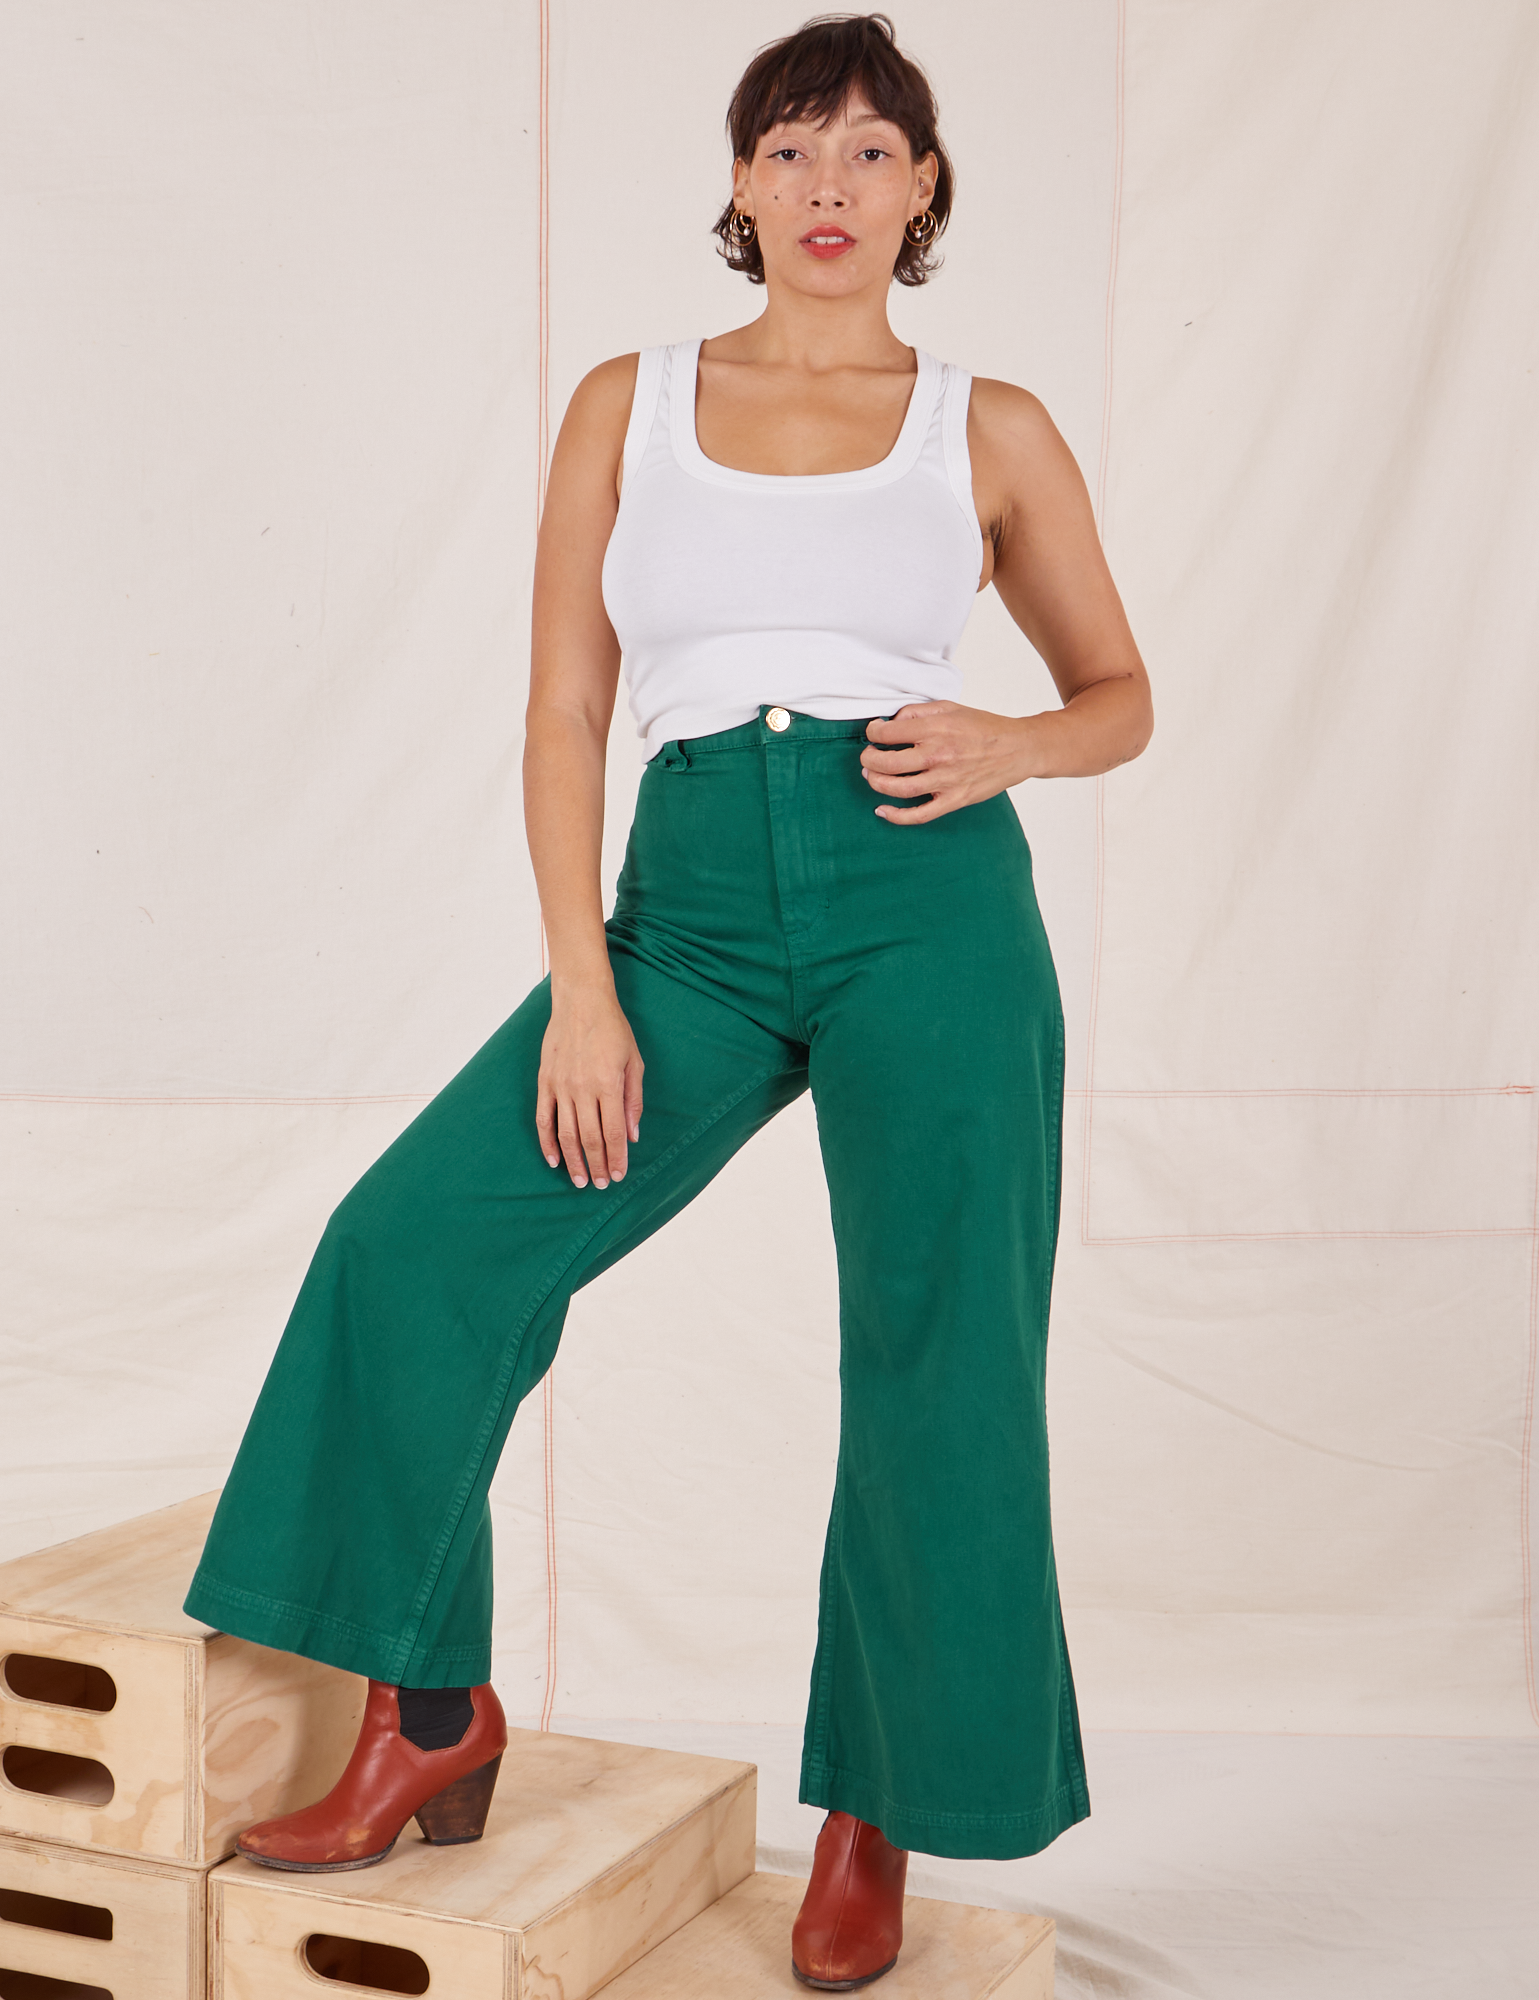 Tiara is 5'4" and wearing XS Bell Bottoms in Hunter Green paired with vintage off-white Cropped Tank Top